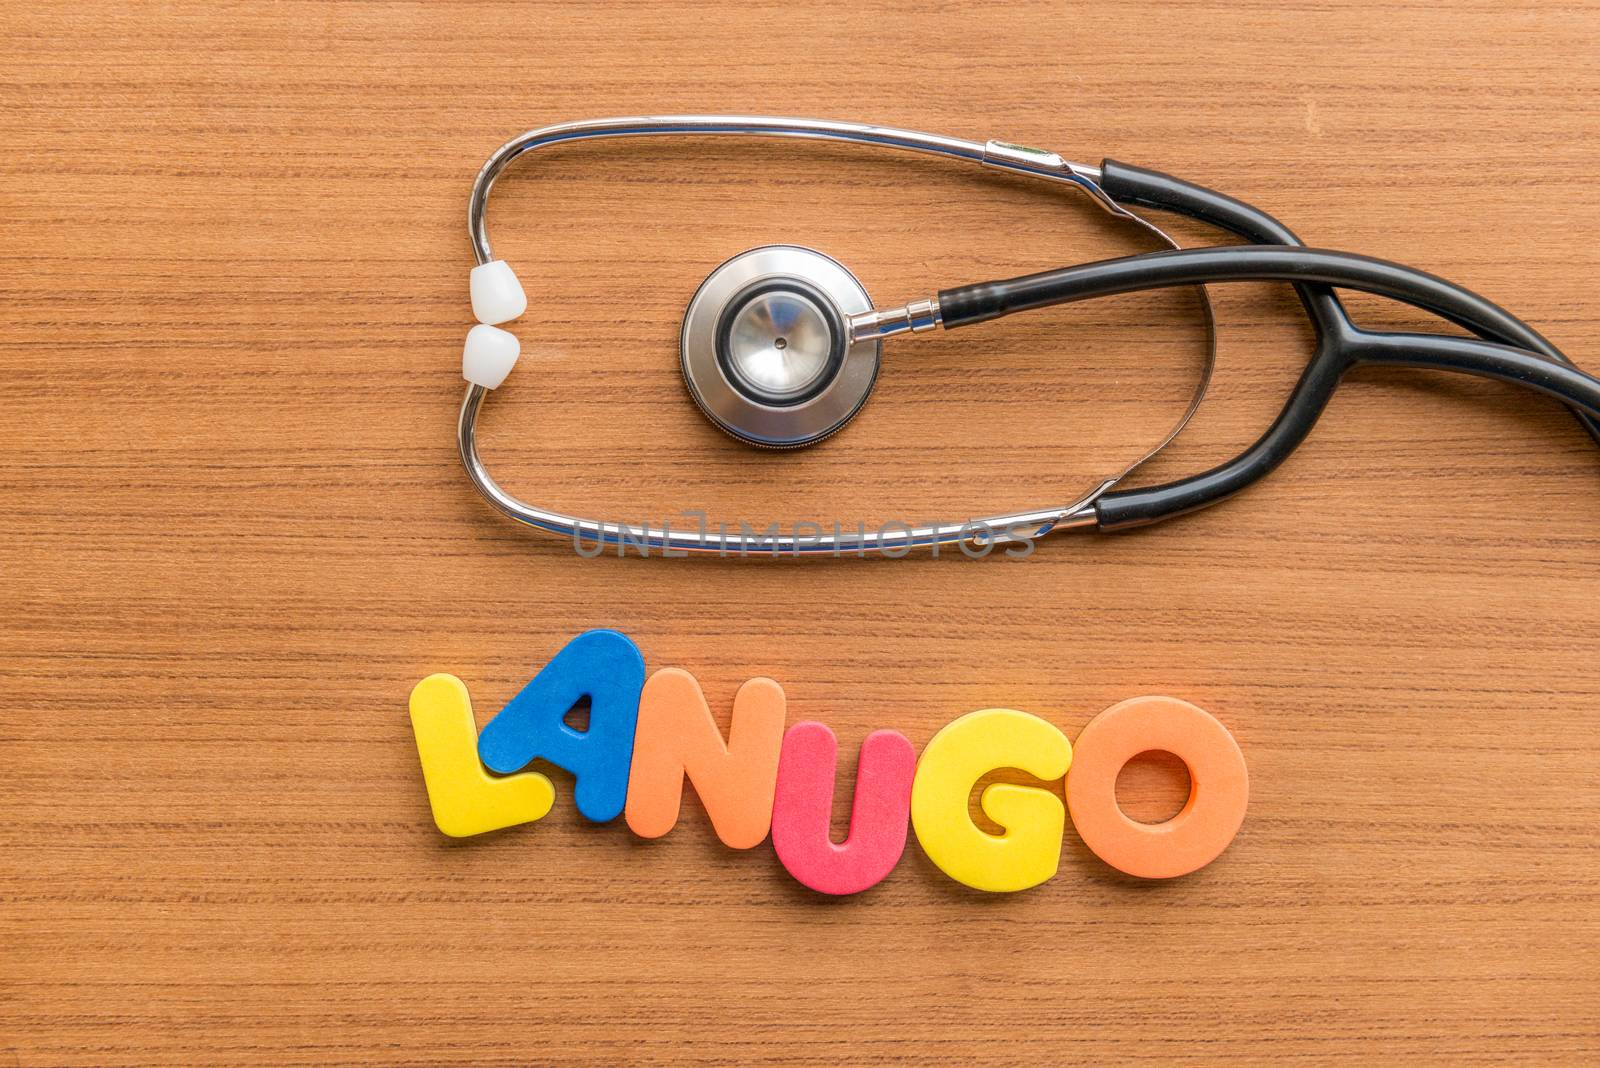 lanugo colorful word with Stethoscope on wooden background